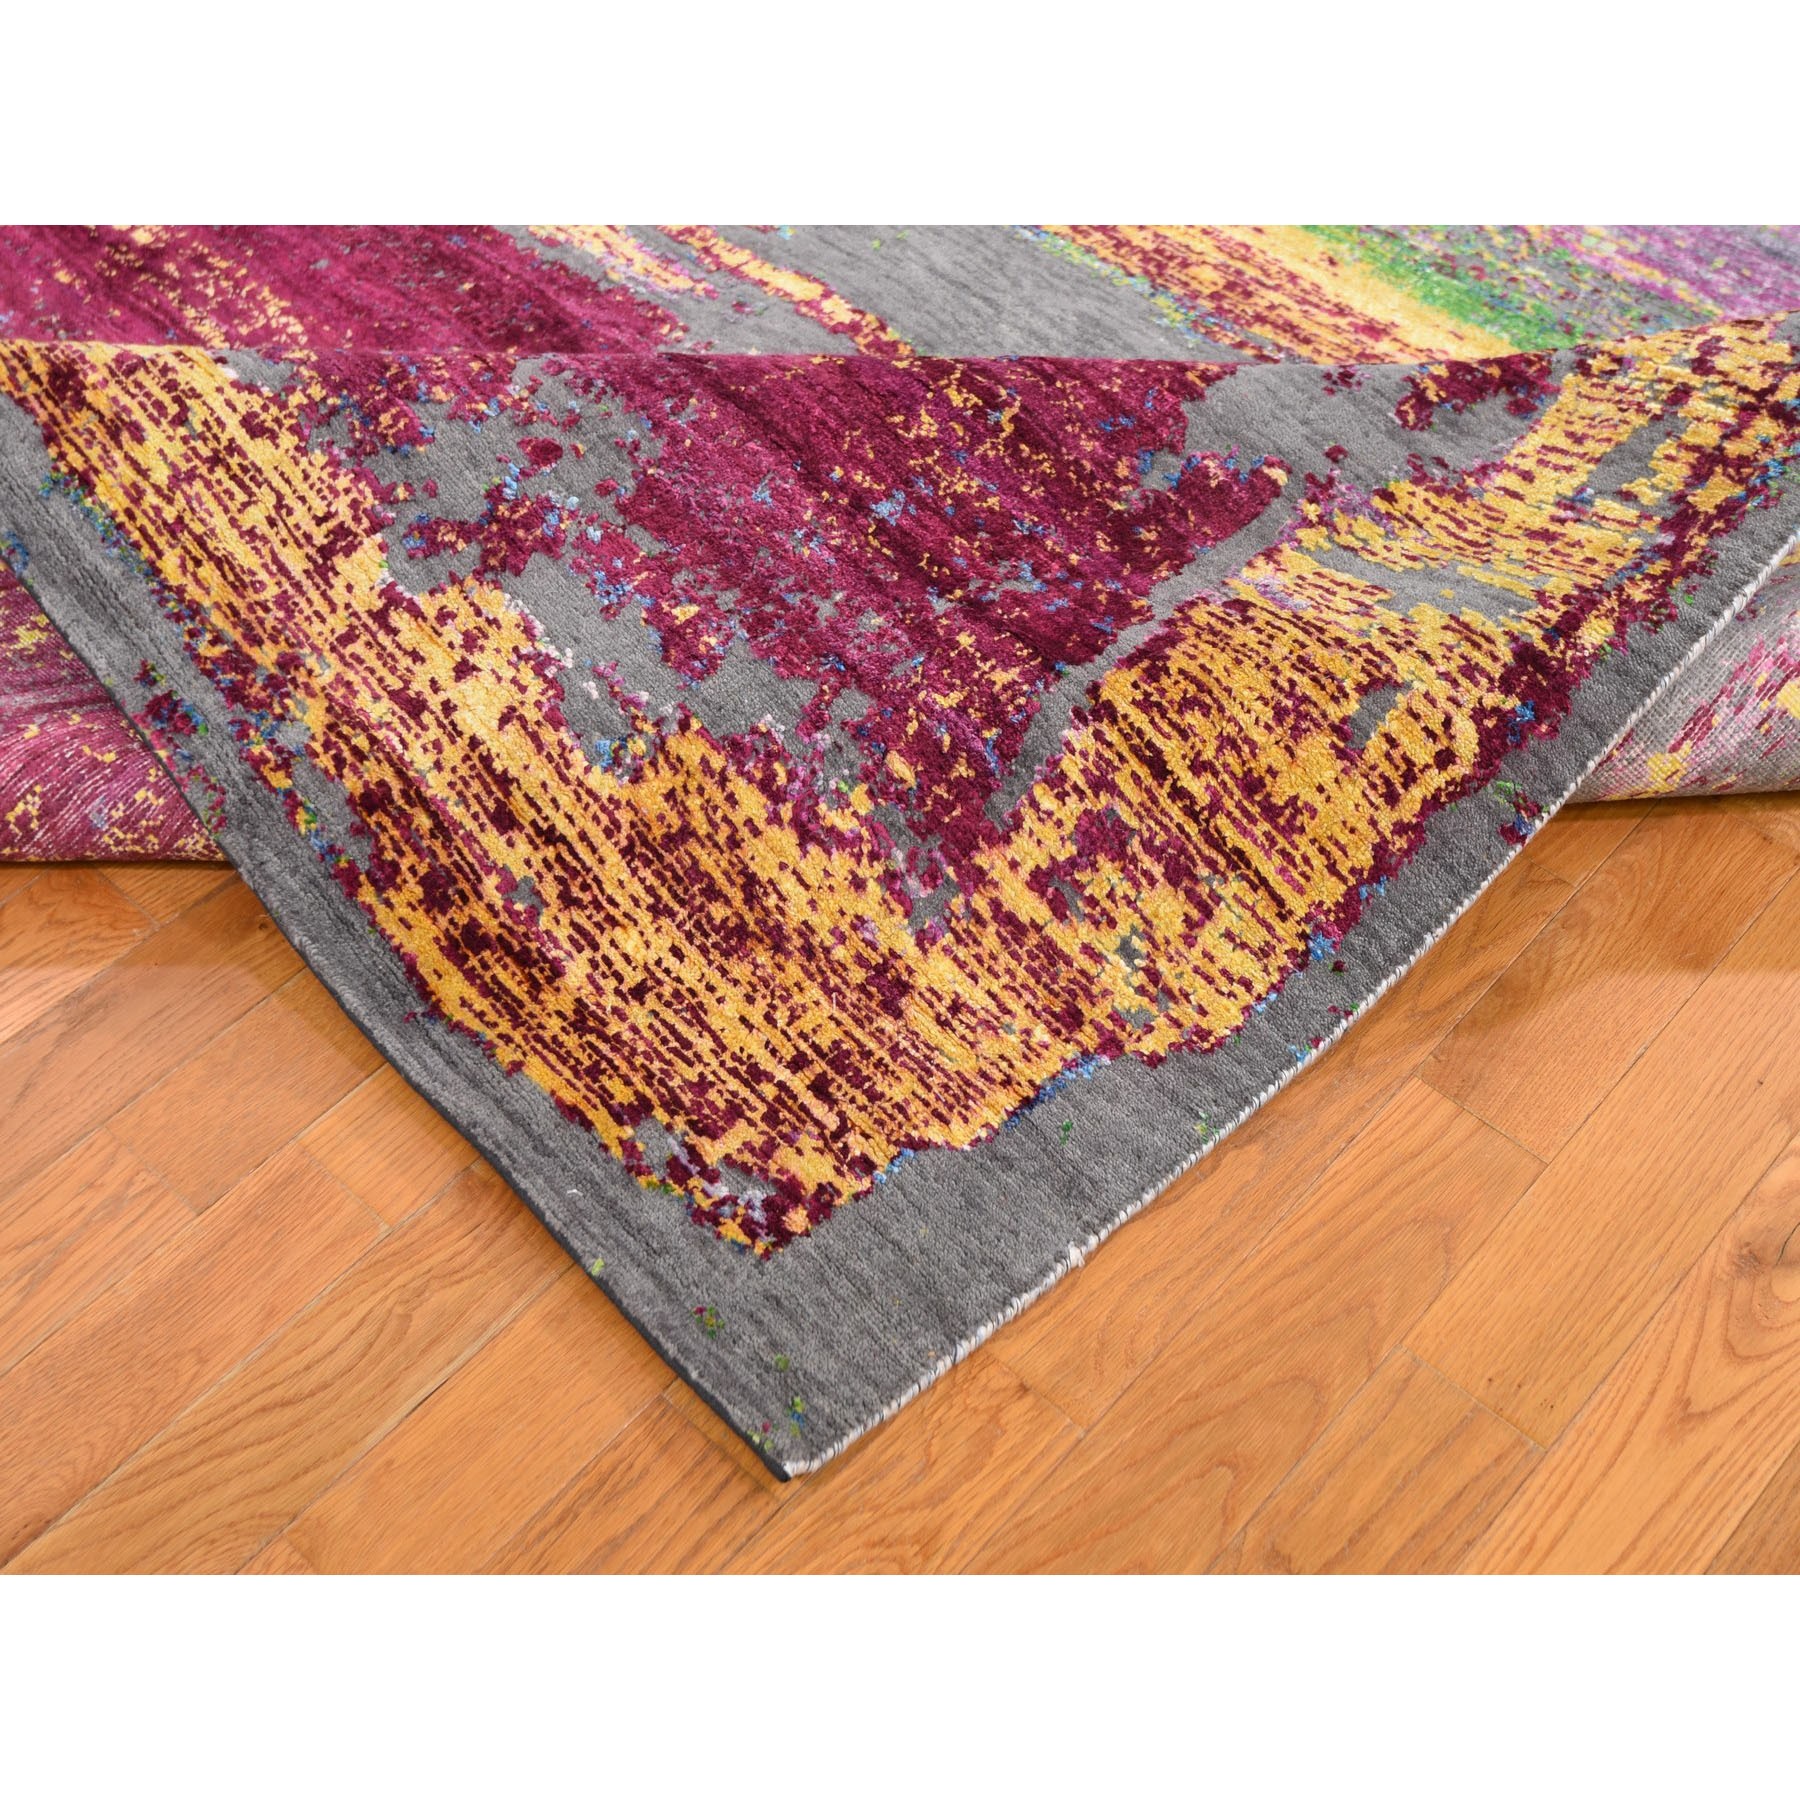 8-10 x12- Rothko Inspired Sari Silk With Textured Wool Hand Knotted Oriental Rug 